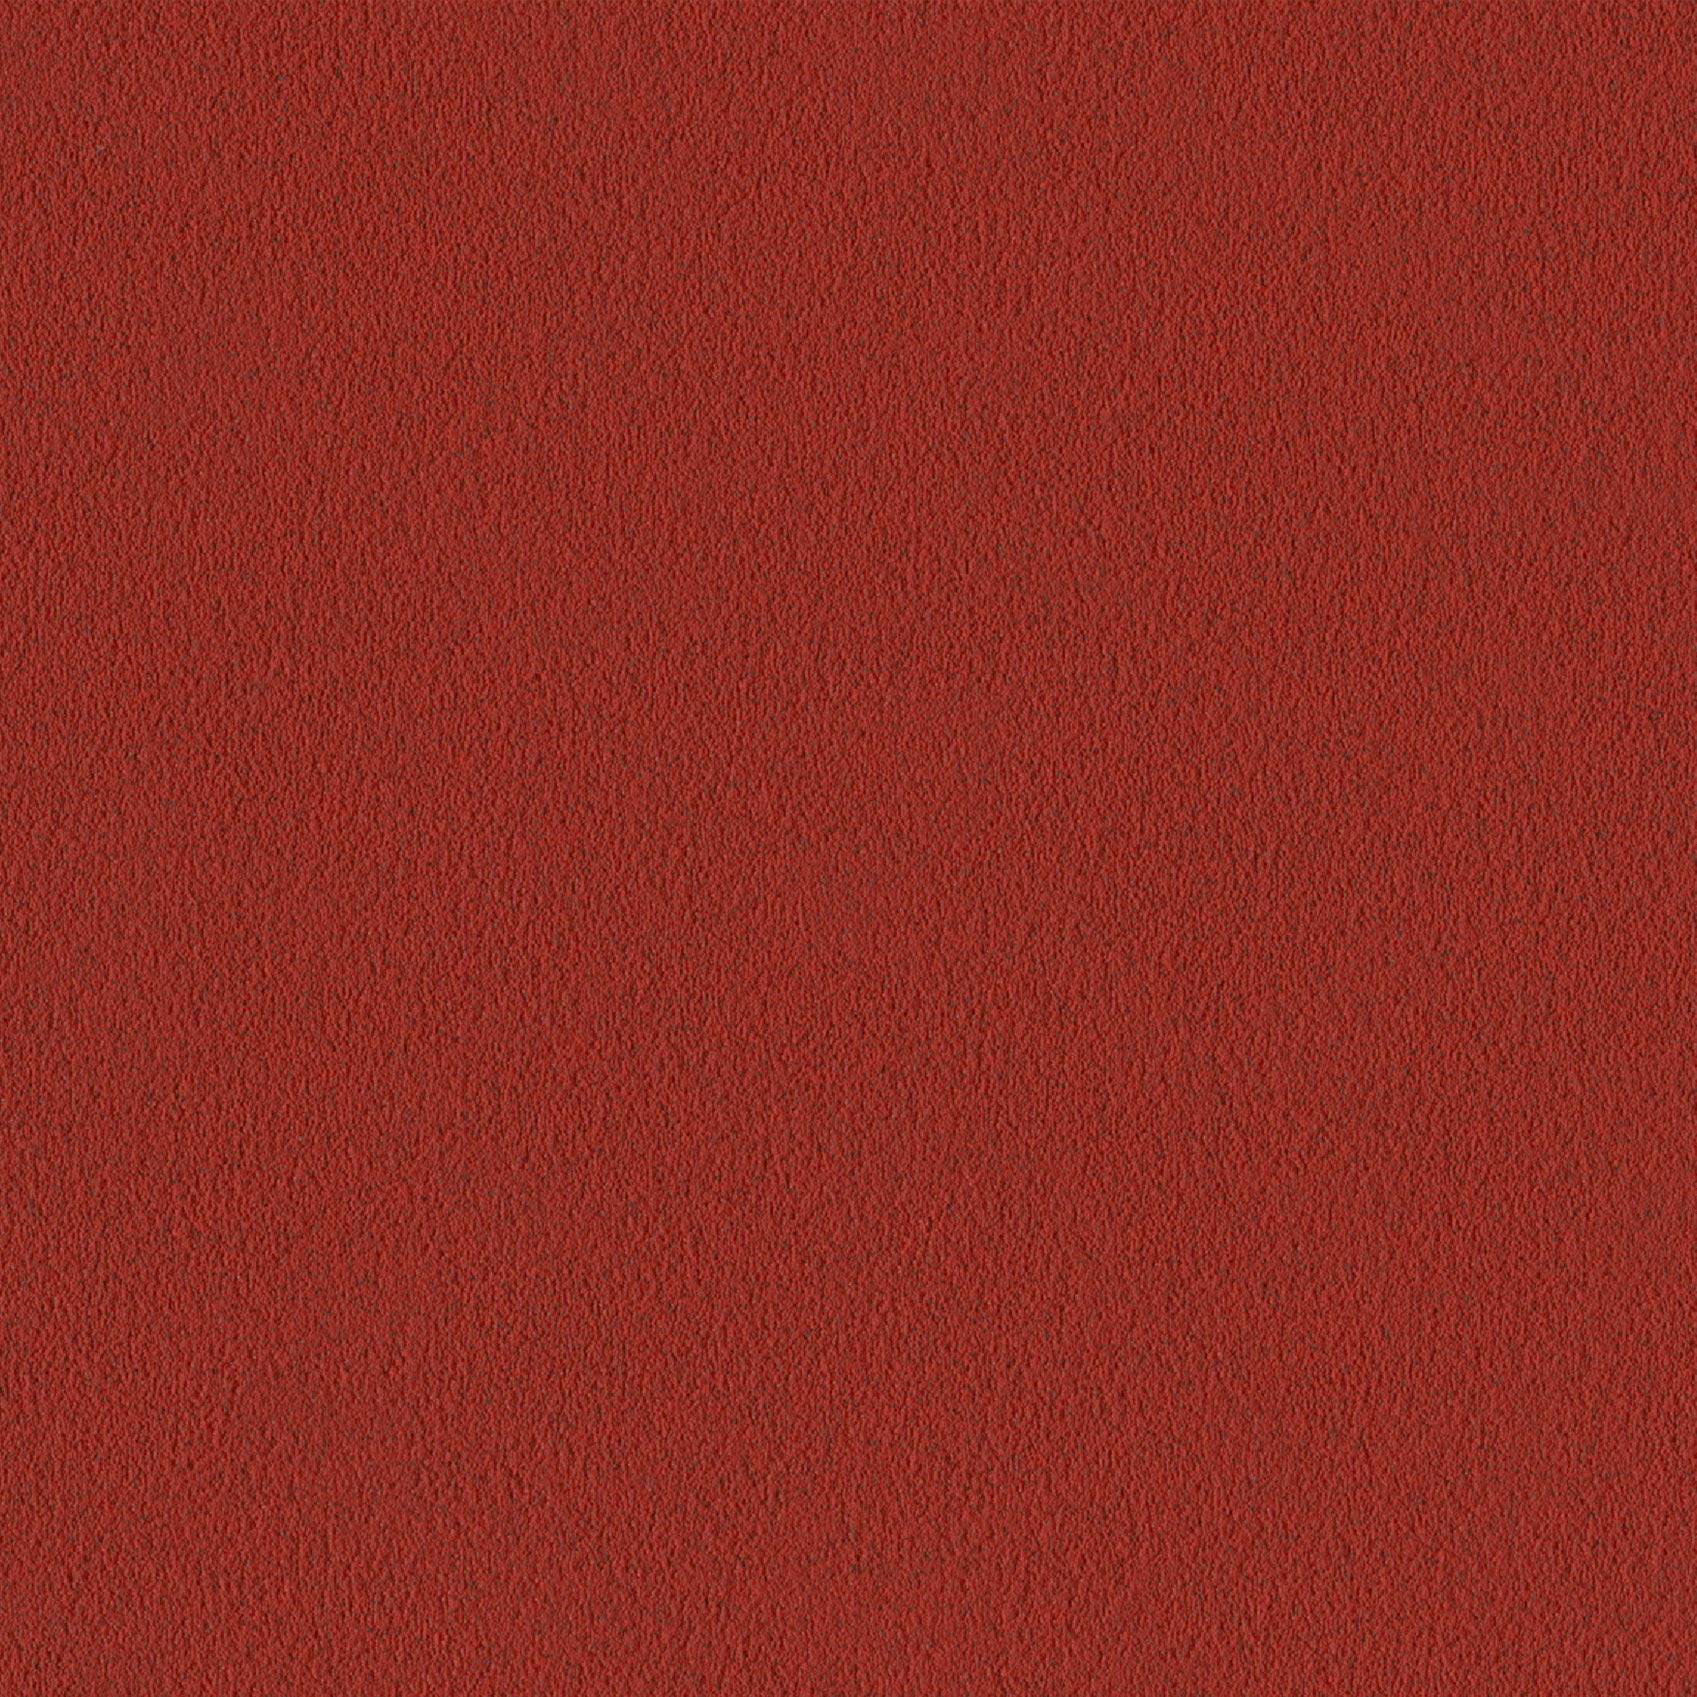 Andriali-Contract-Vinyl_Upholstery-Design-Serenity-Color-220Chili-Width-140cm